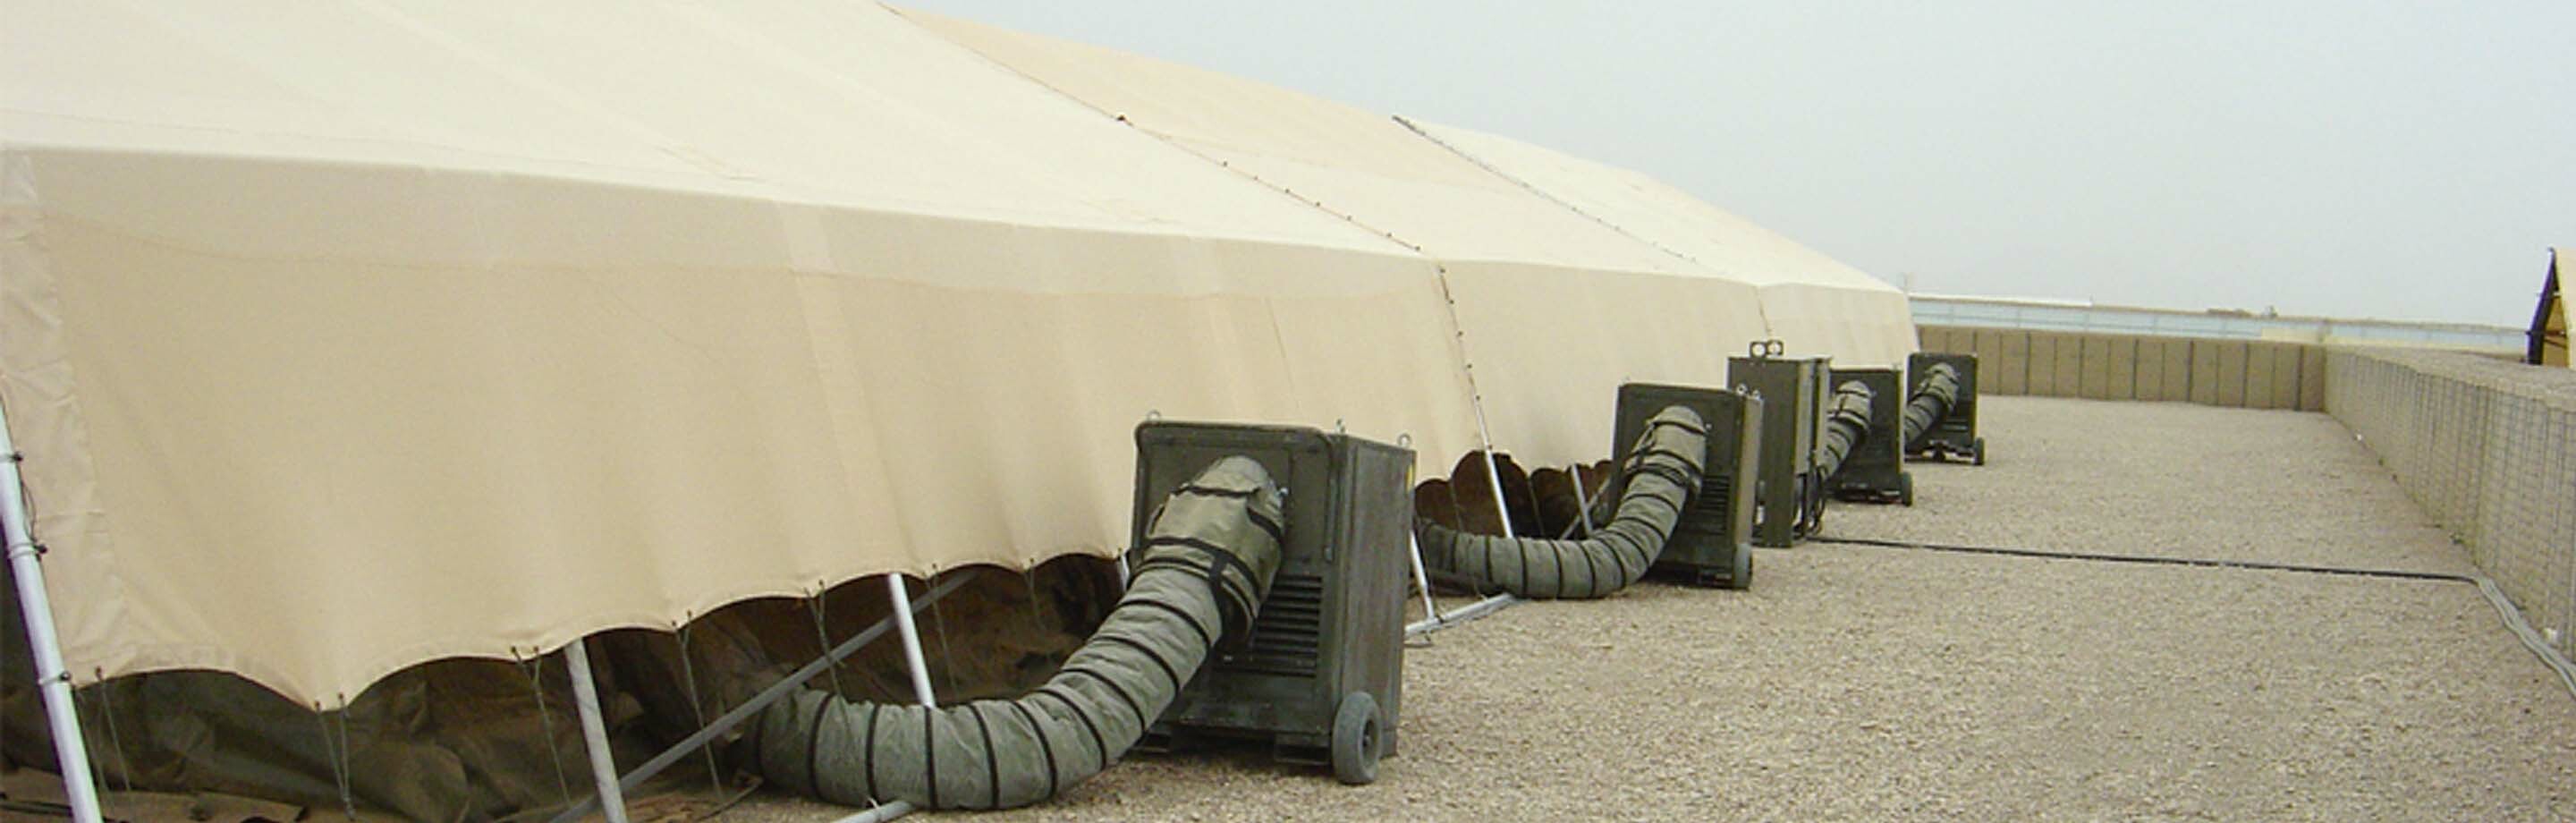 Home Page Main Image Dantherm tent